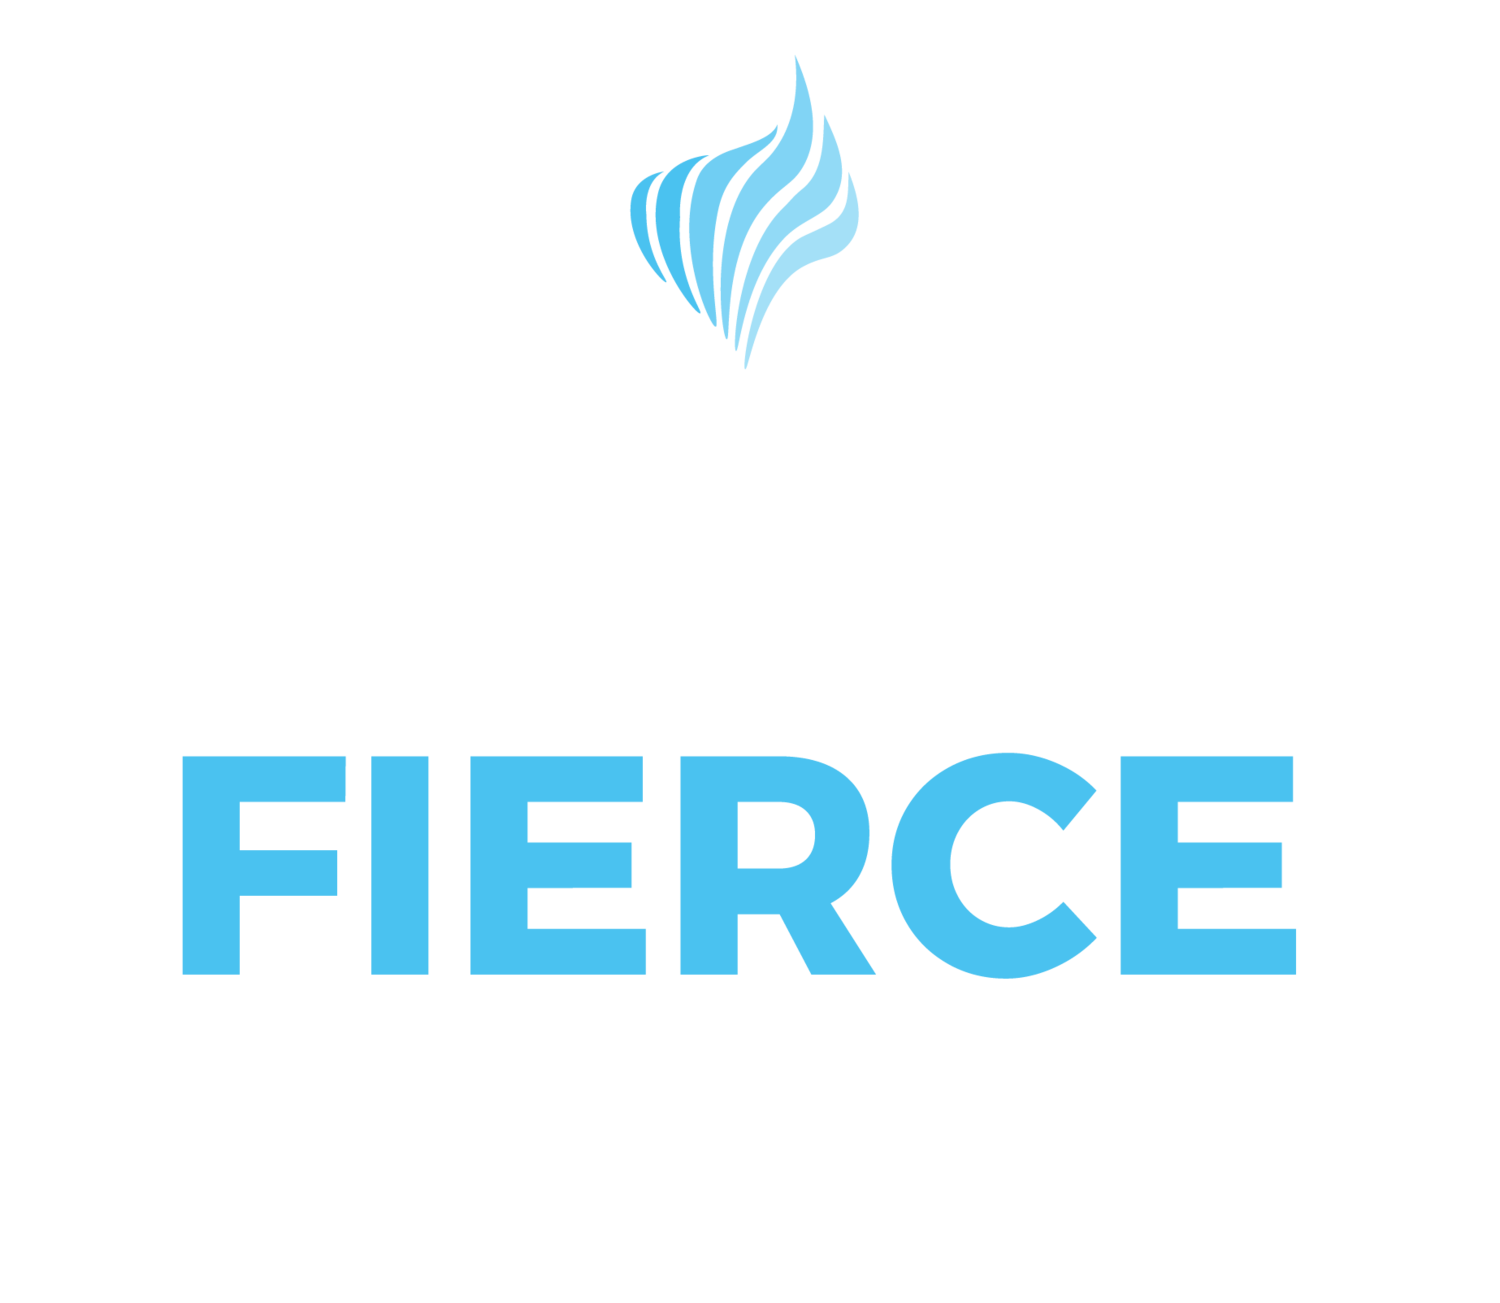 Purpose, Vision, and Mission — FIERCE Athlete